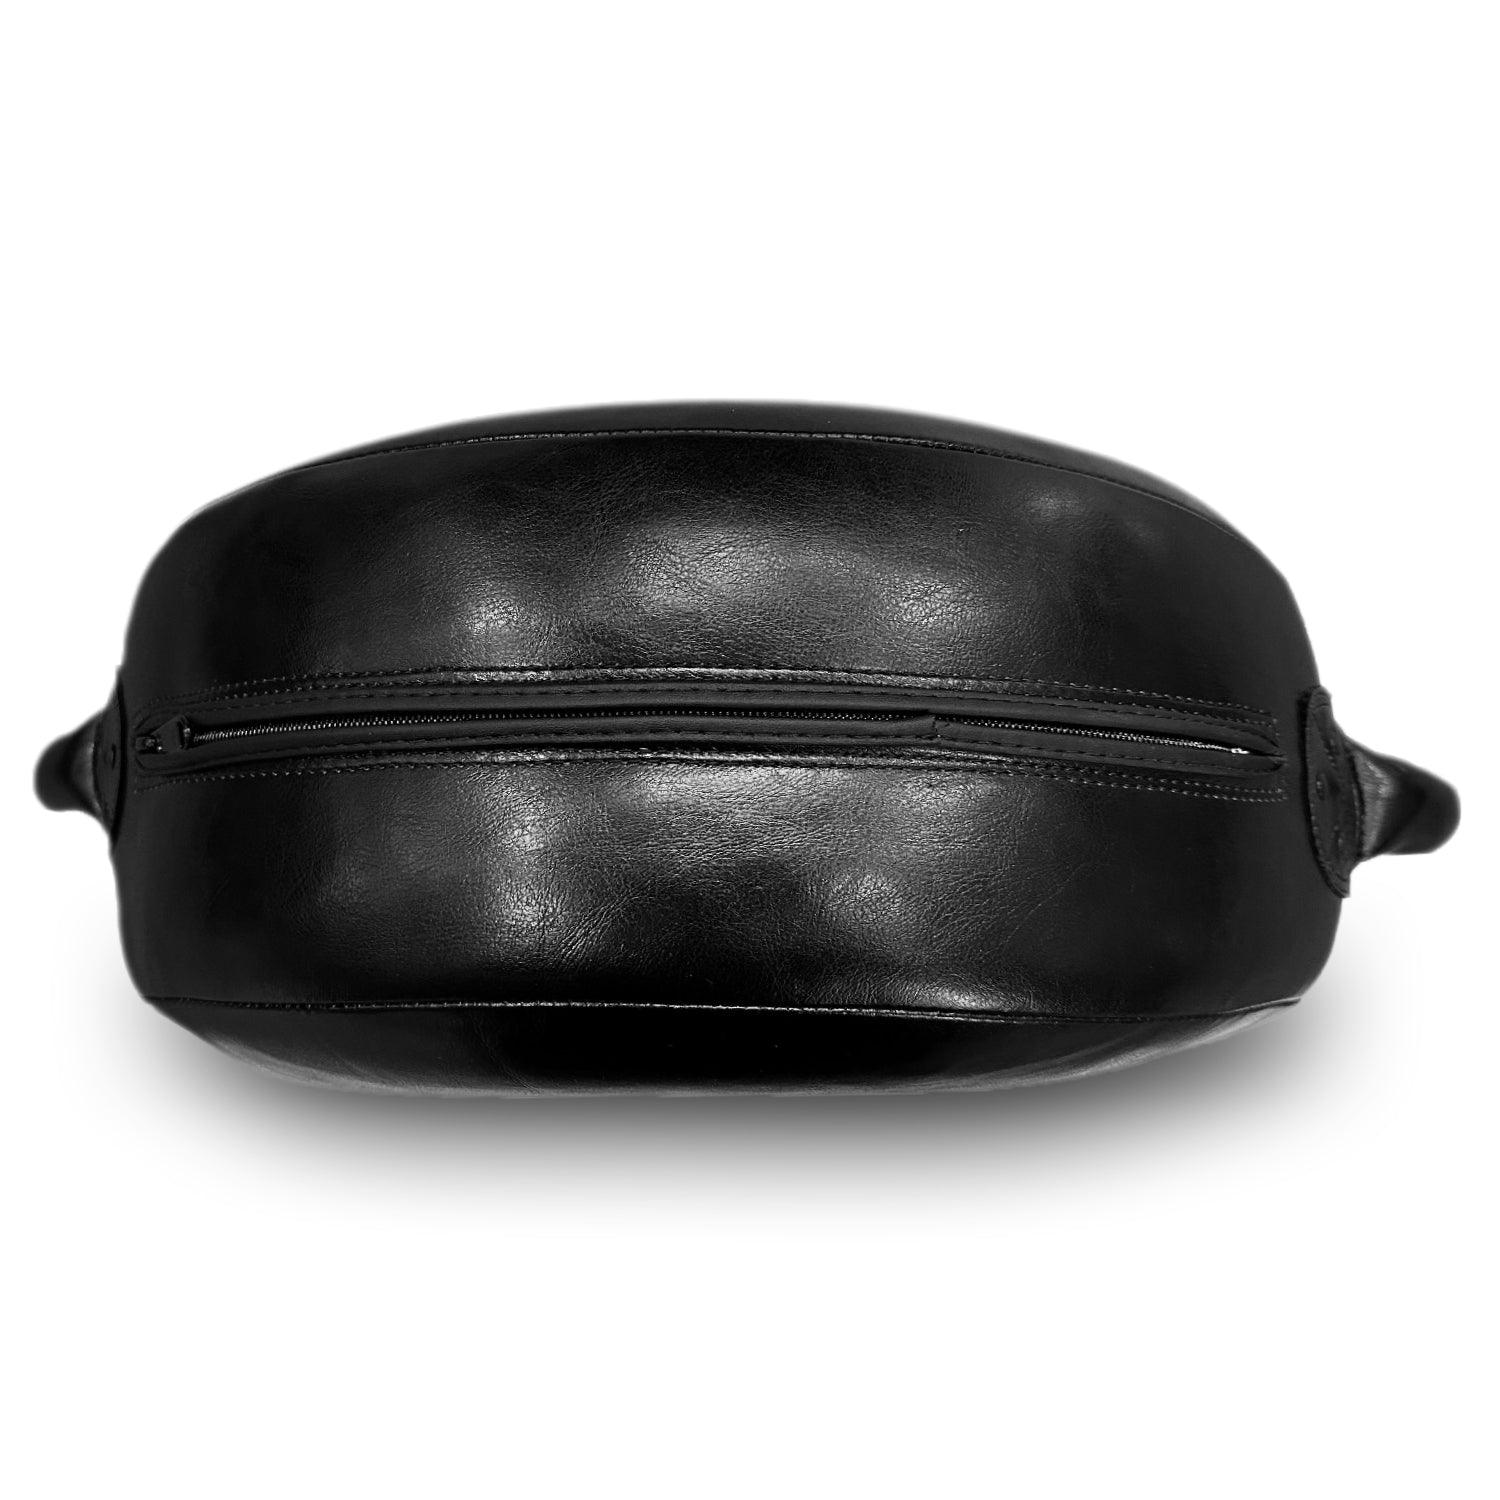 RingMaster Sports Round Punch Kick Shield Large Synthetic Leather Black - RINGMASTER SPORTS - Made For Champions